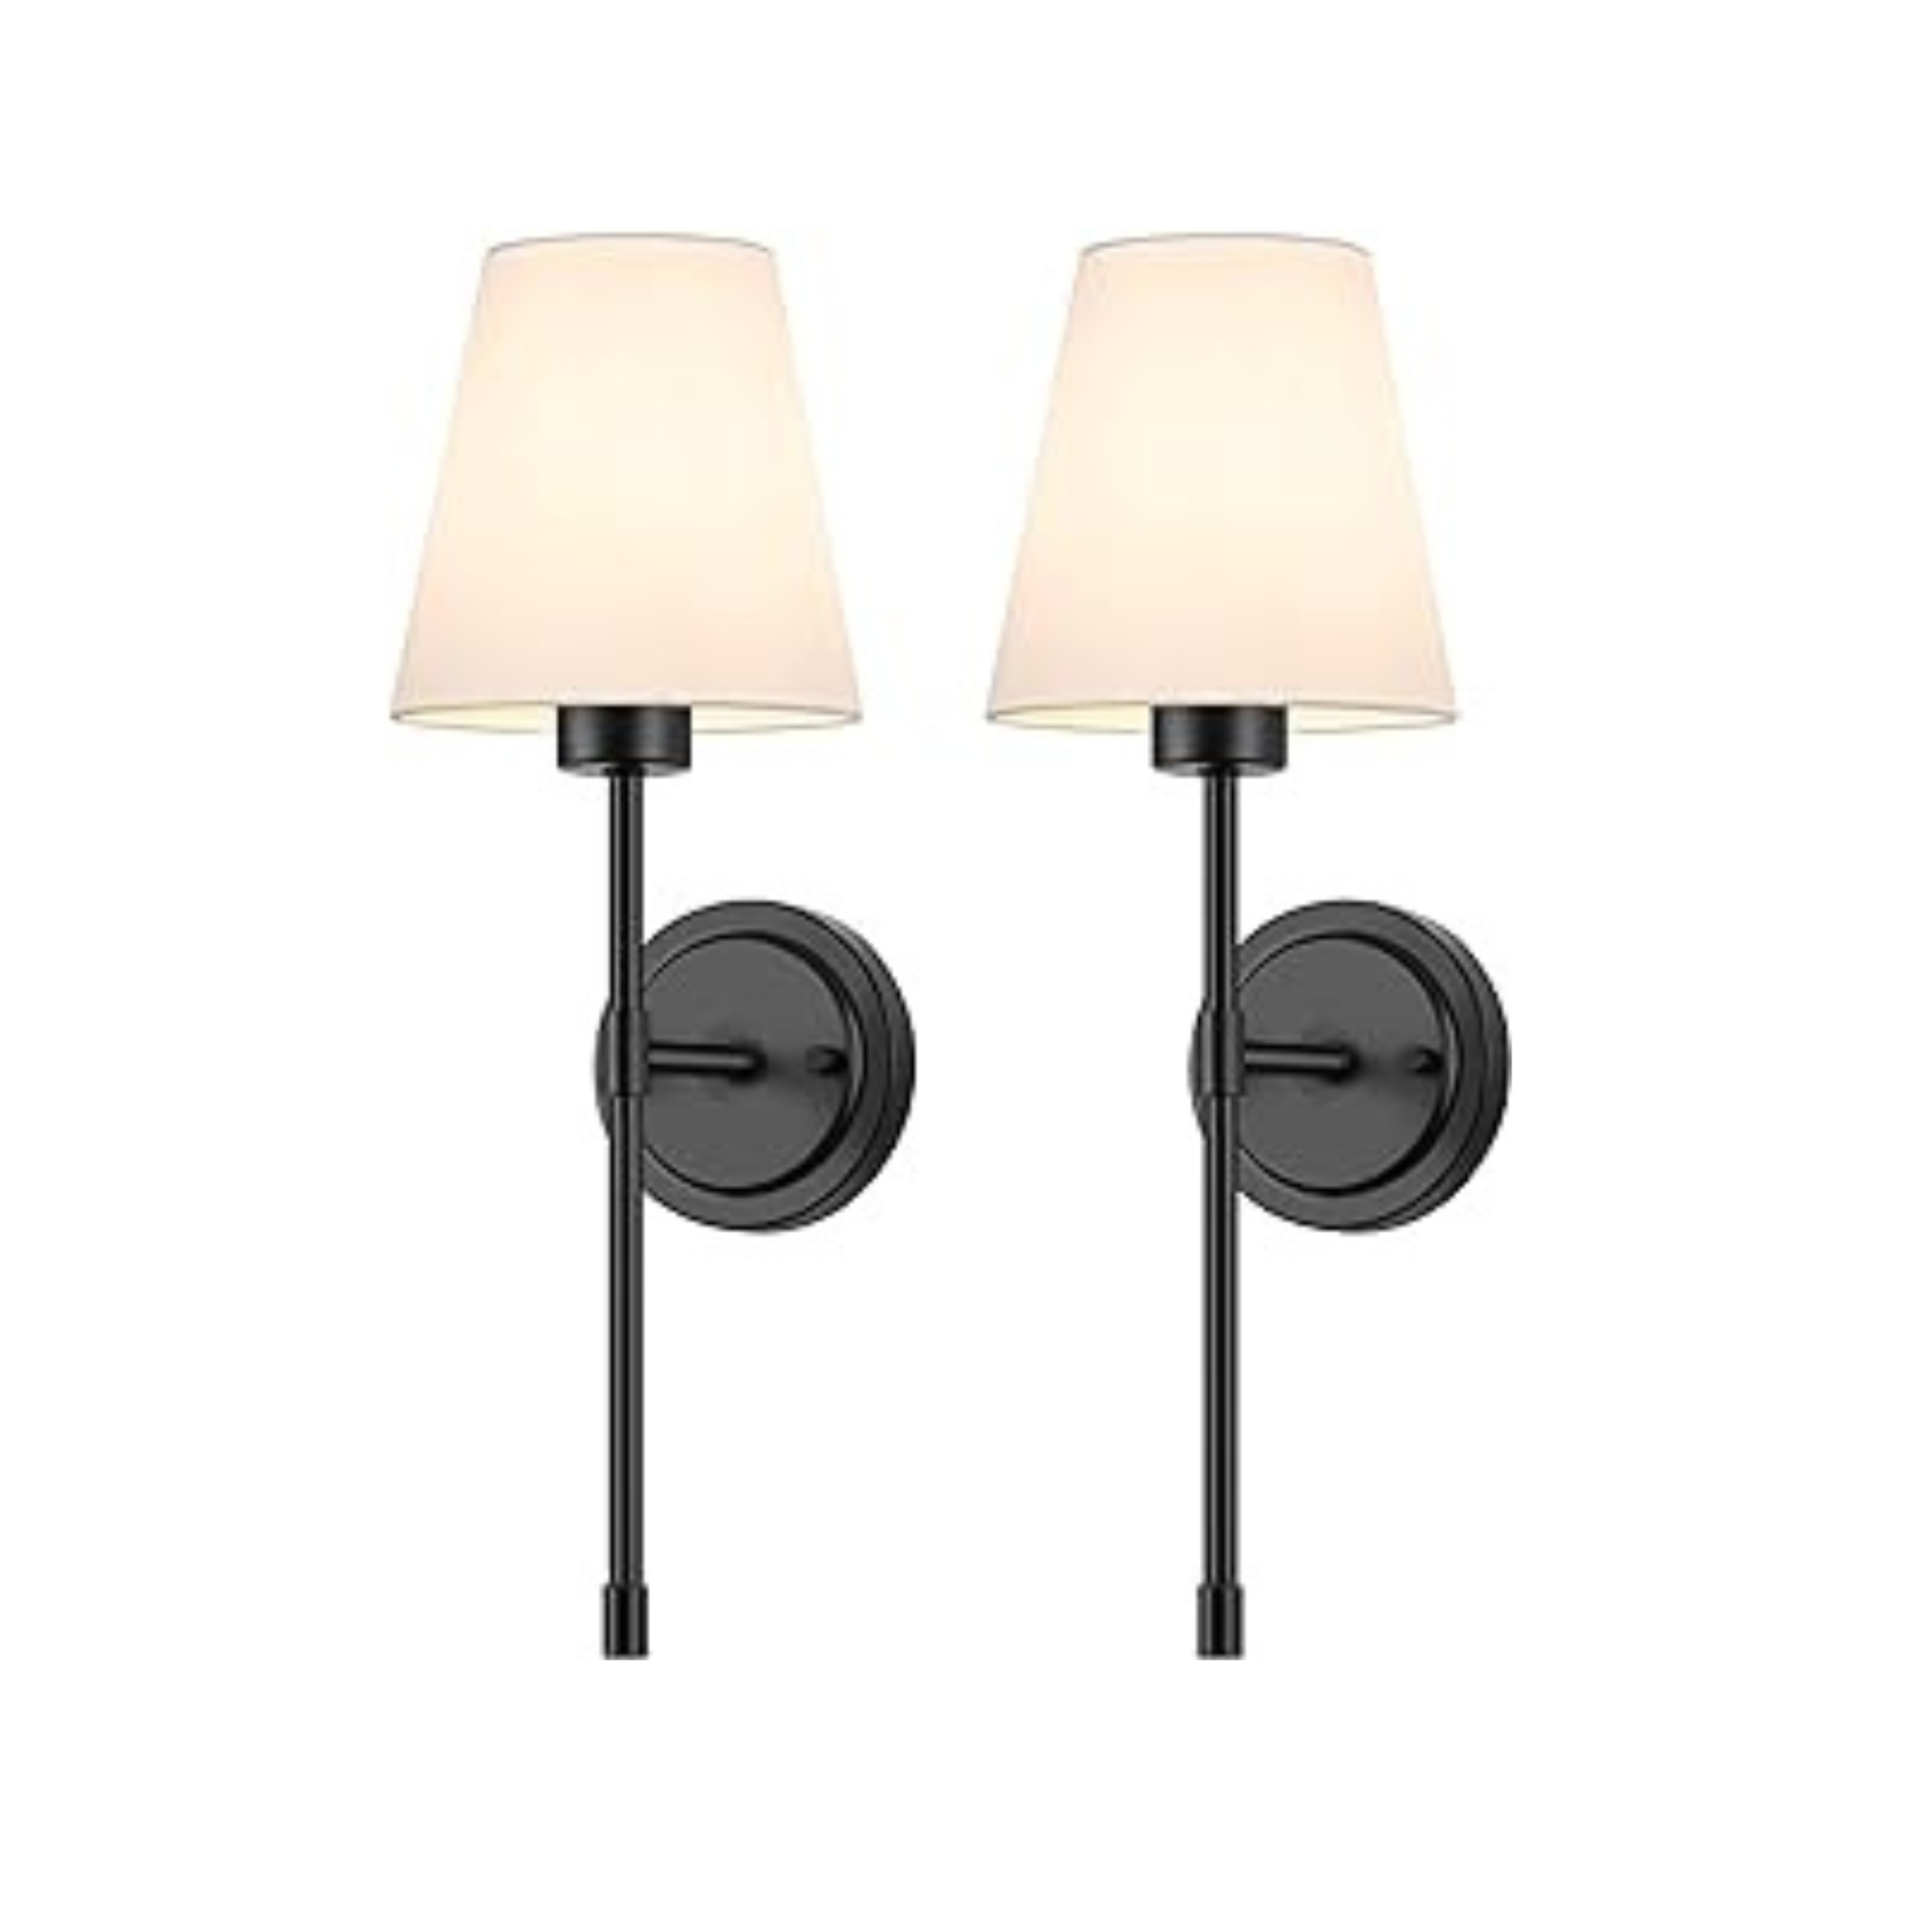 Set of 2 Retro Industrial Wall Lamp